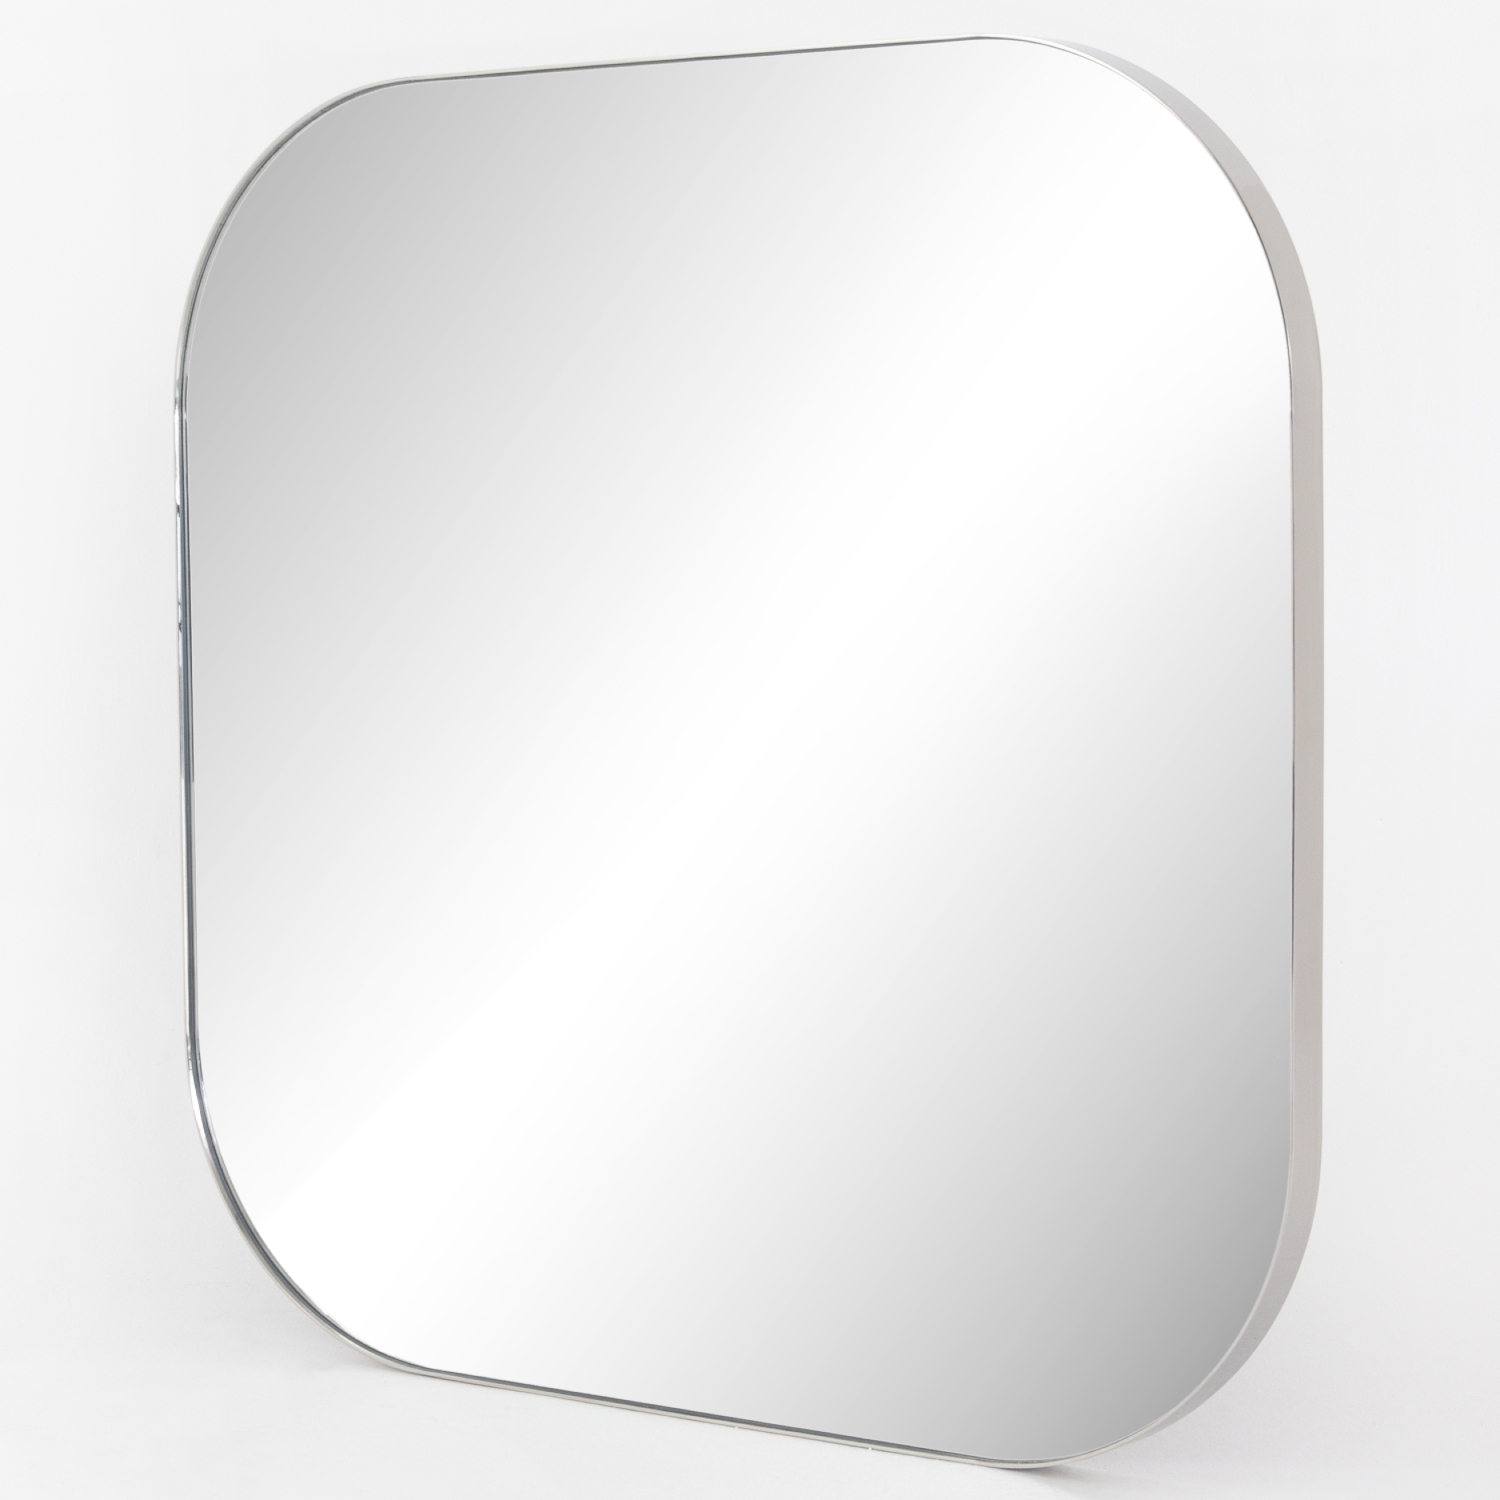 Ian Modern Classic Silver Stainless Steel Square Mirror - Large - Image 1